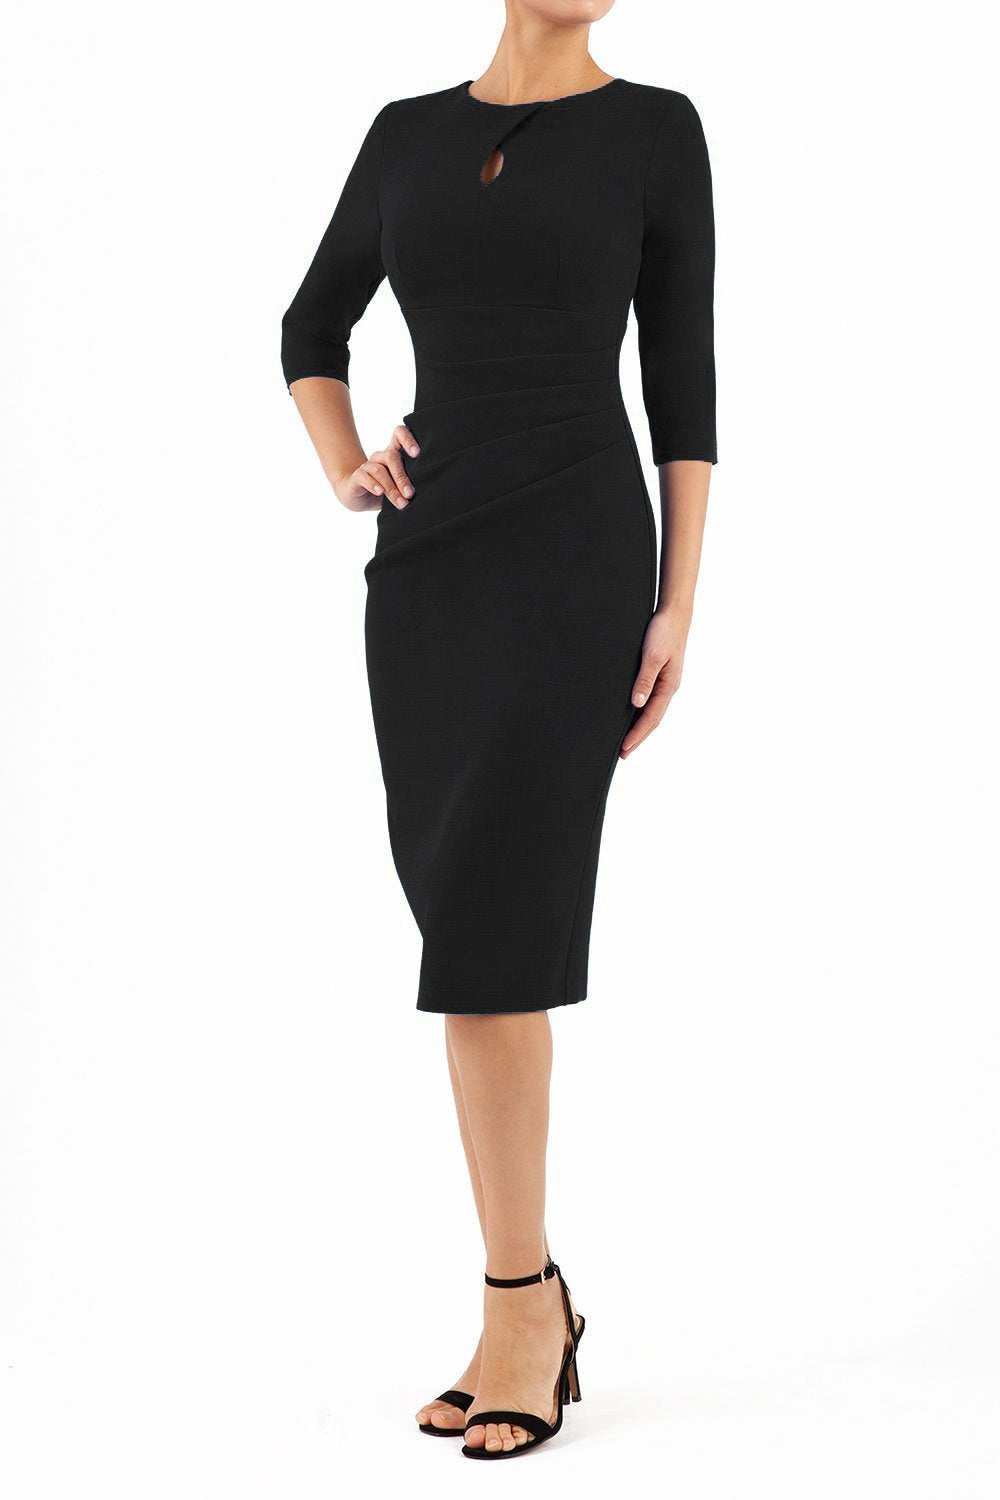 Women' Business Ubrique Dress - Black NORA GARDNER | OFFICIAL STORE for work and office